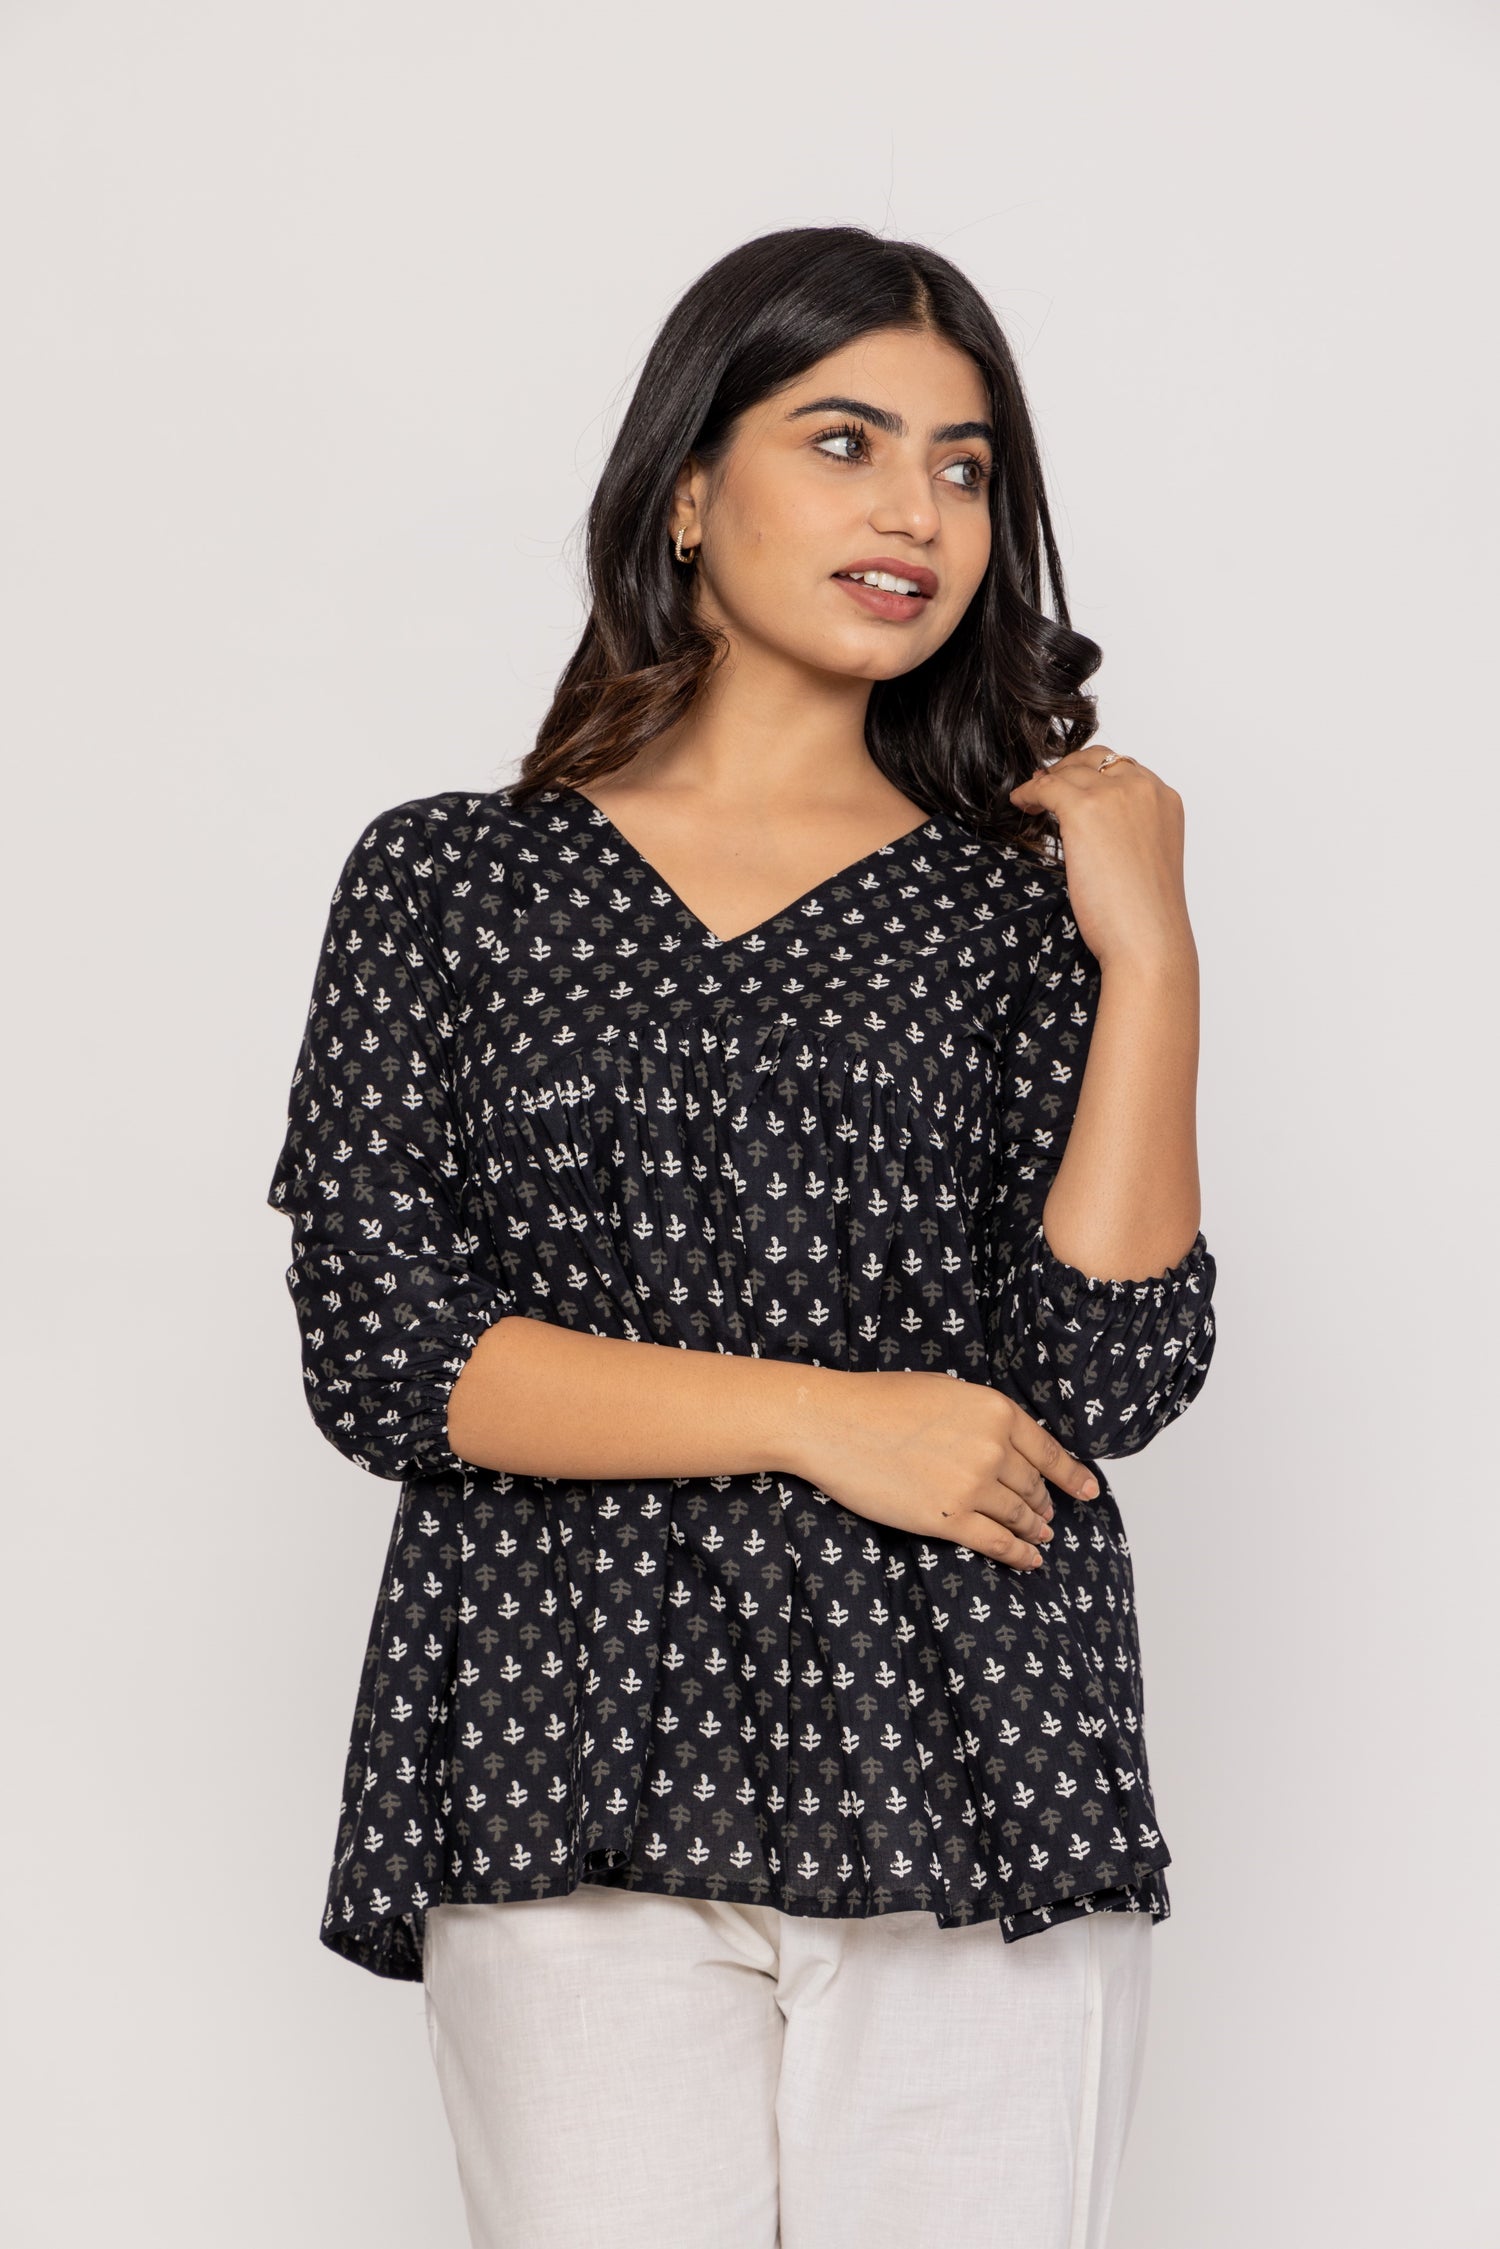 Women's Pure Cotton Floral Print Black Top, Latest Trendy Short Tunic Tops  For Girls at Rs 295/piece, Chanderi Tunic in Jaipur